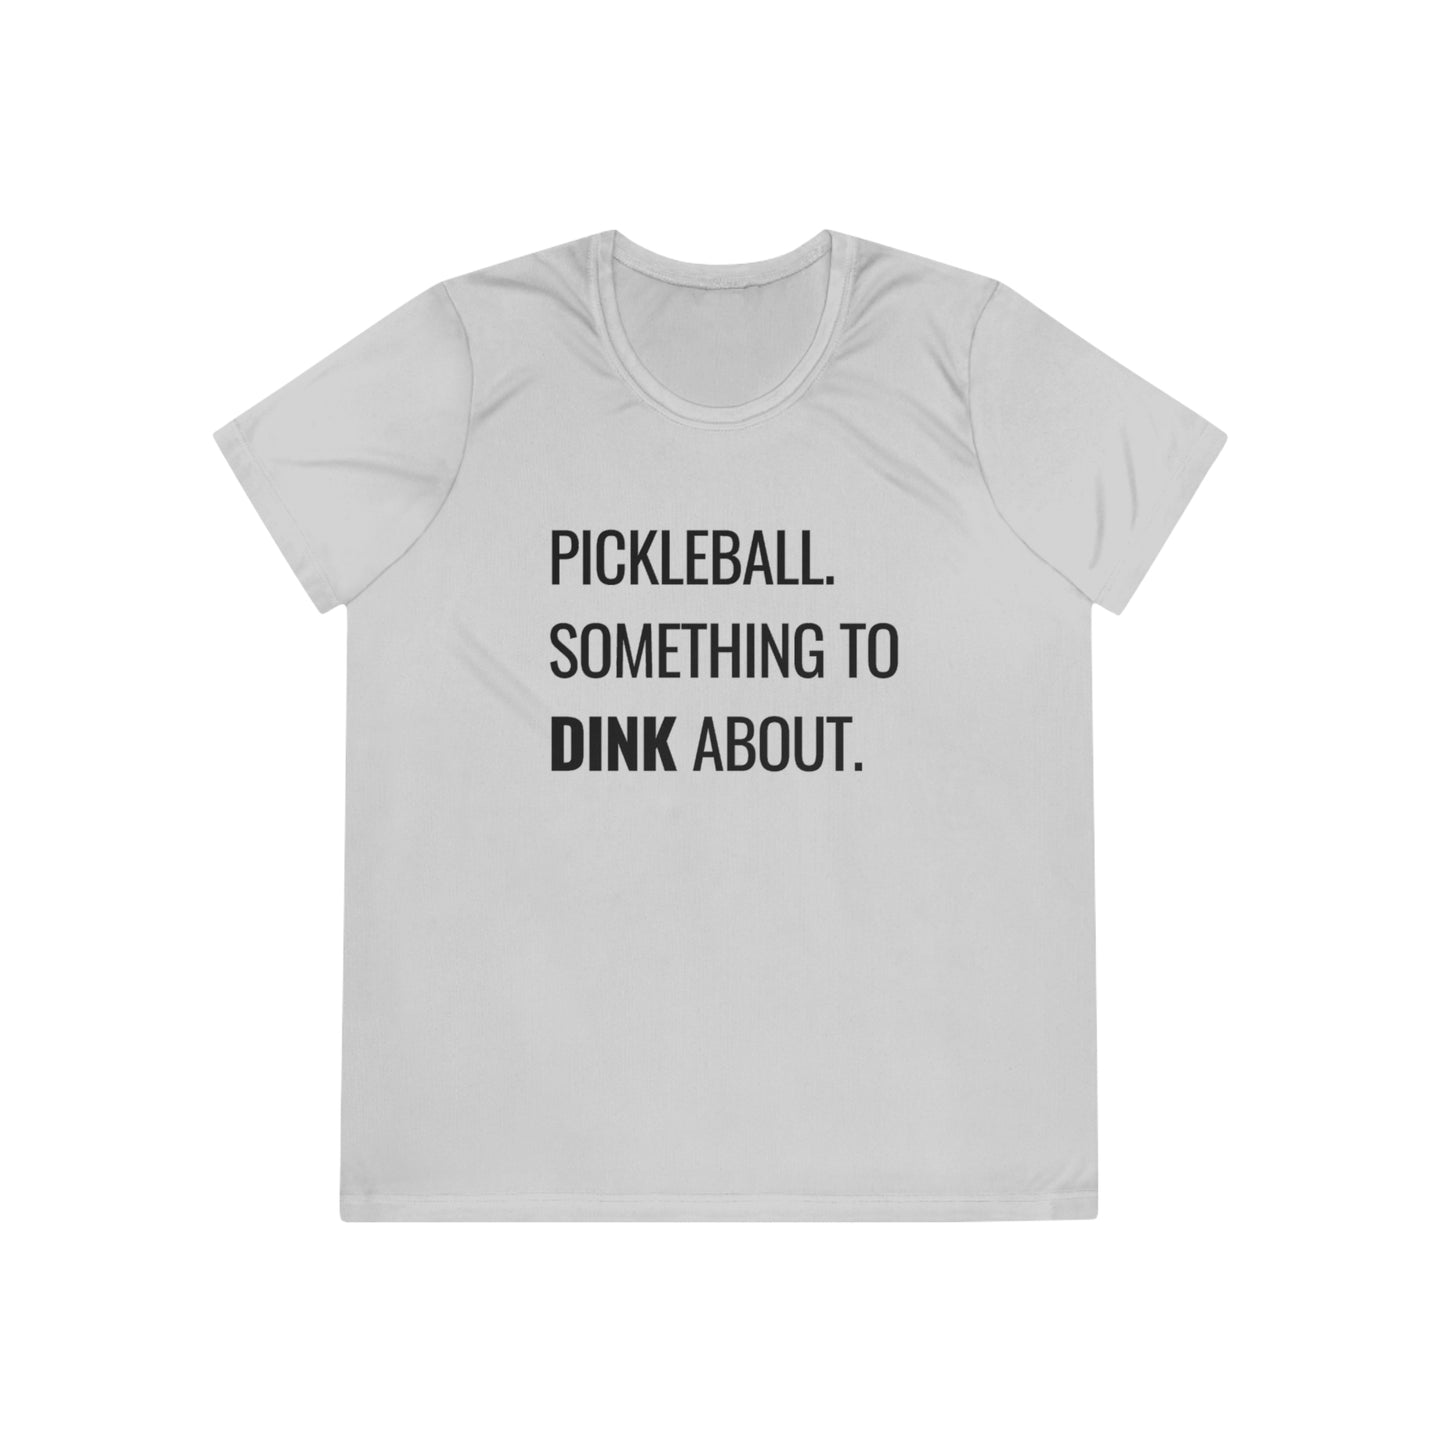 Pickleball.  Something To Dink About. Women's Moisture Wicking